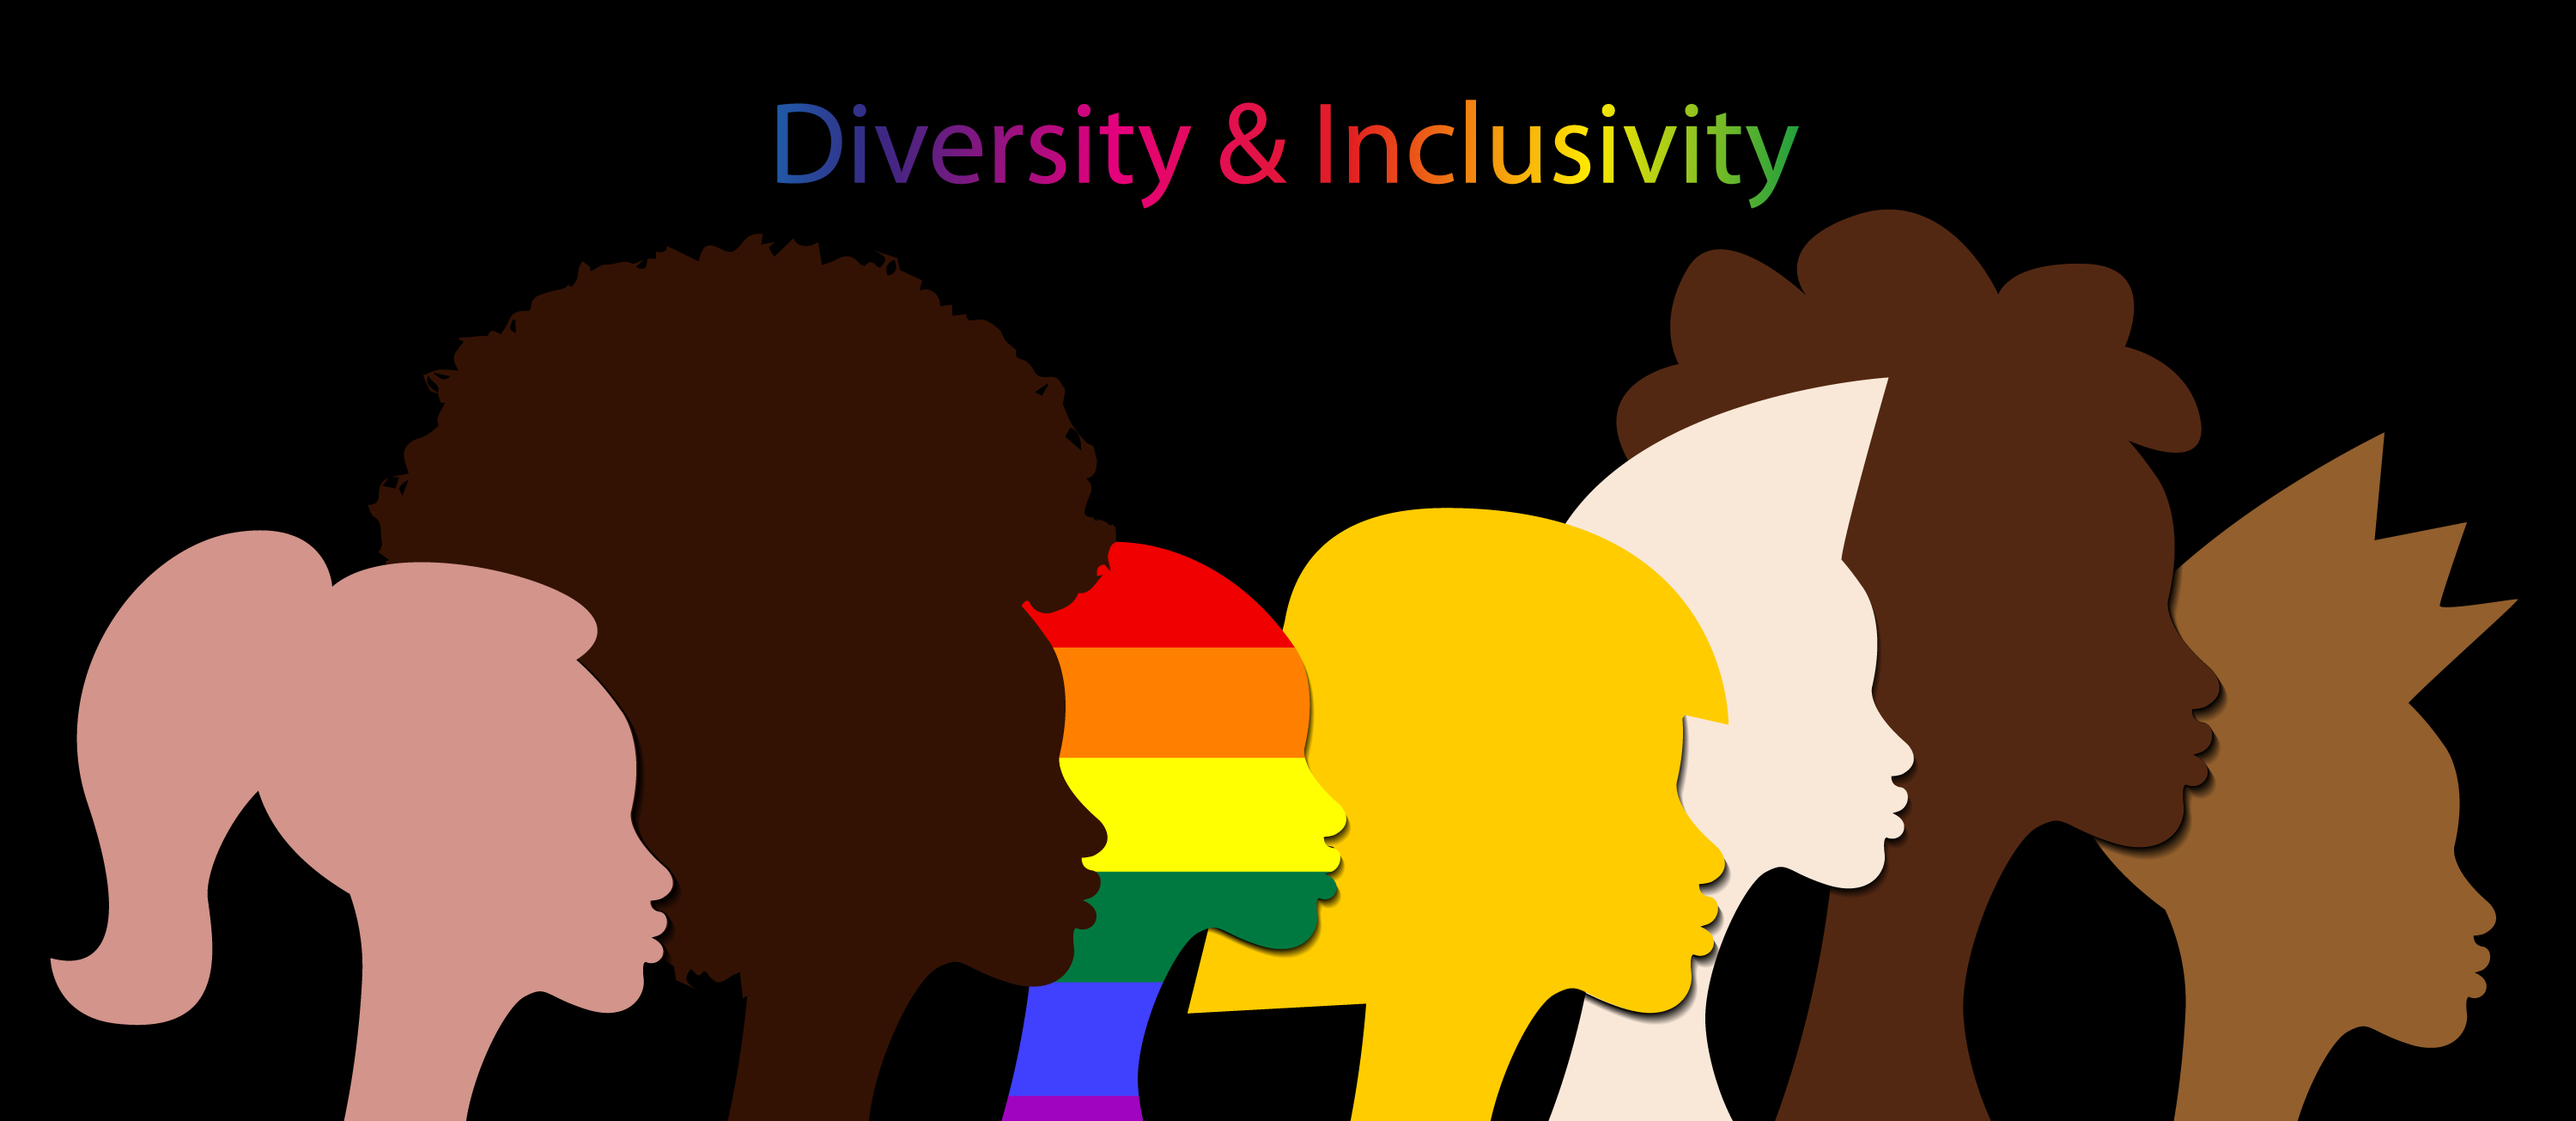 IFA Position statement on equity, diversity and inclusion